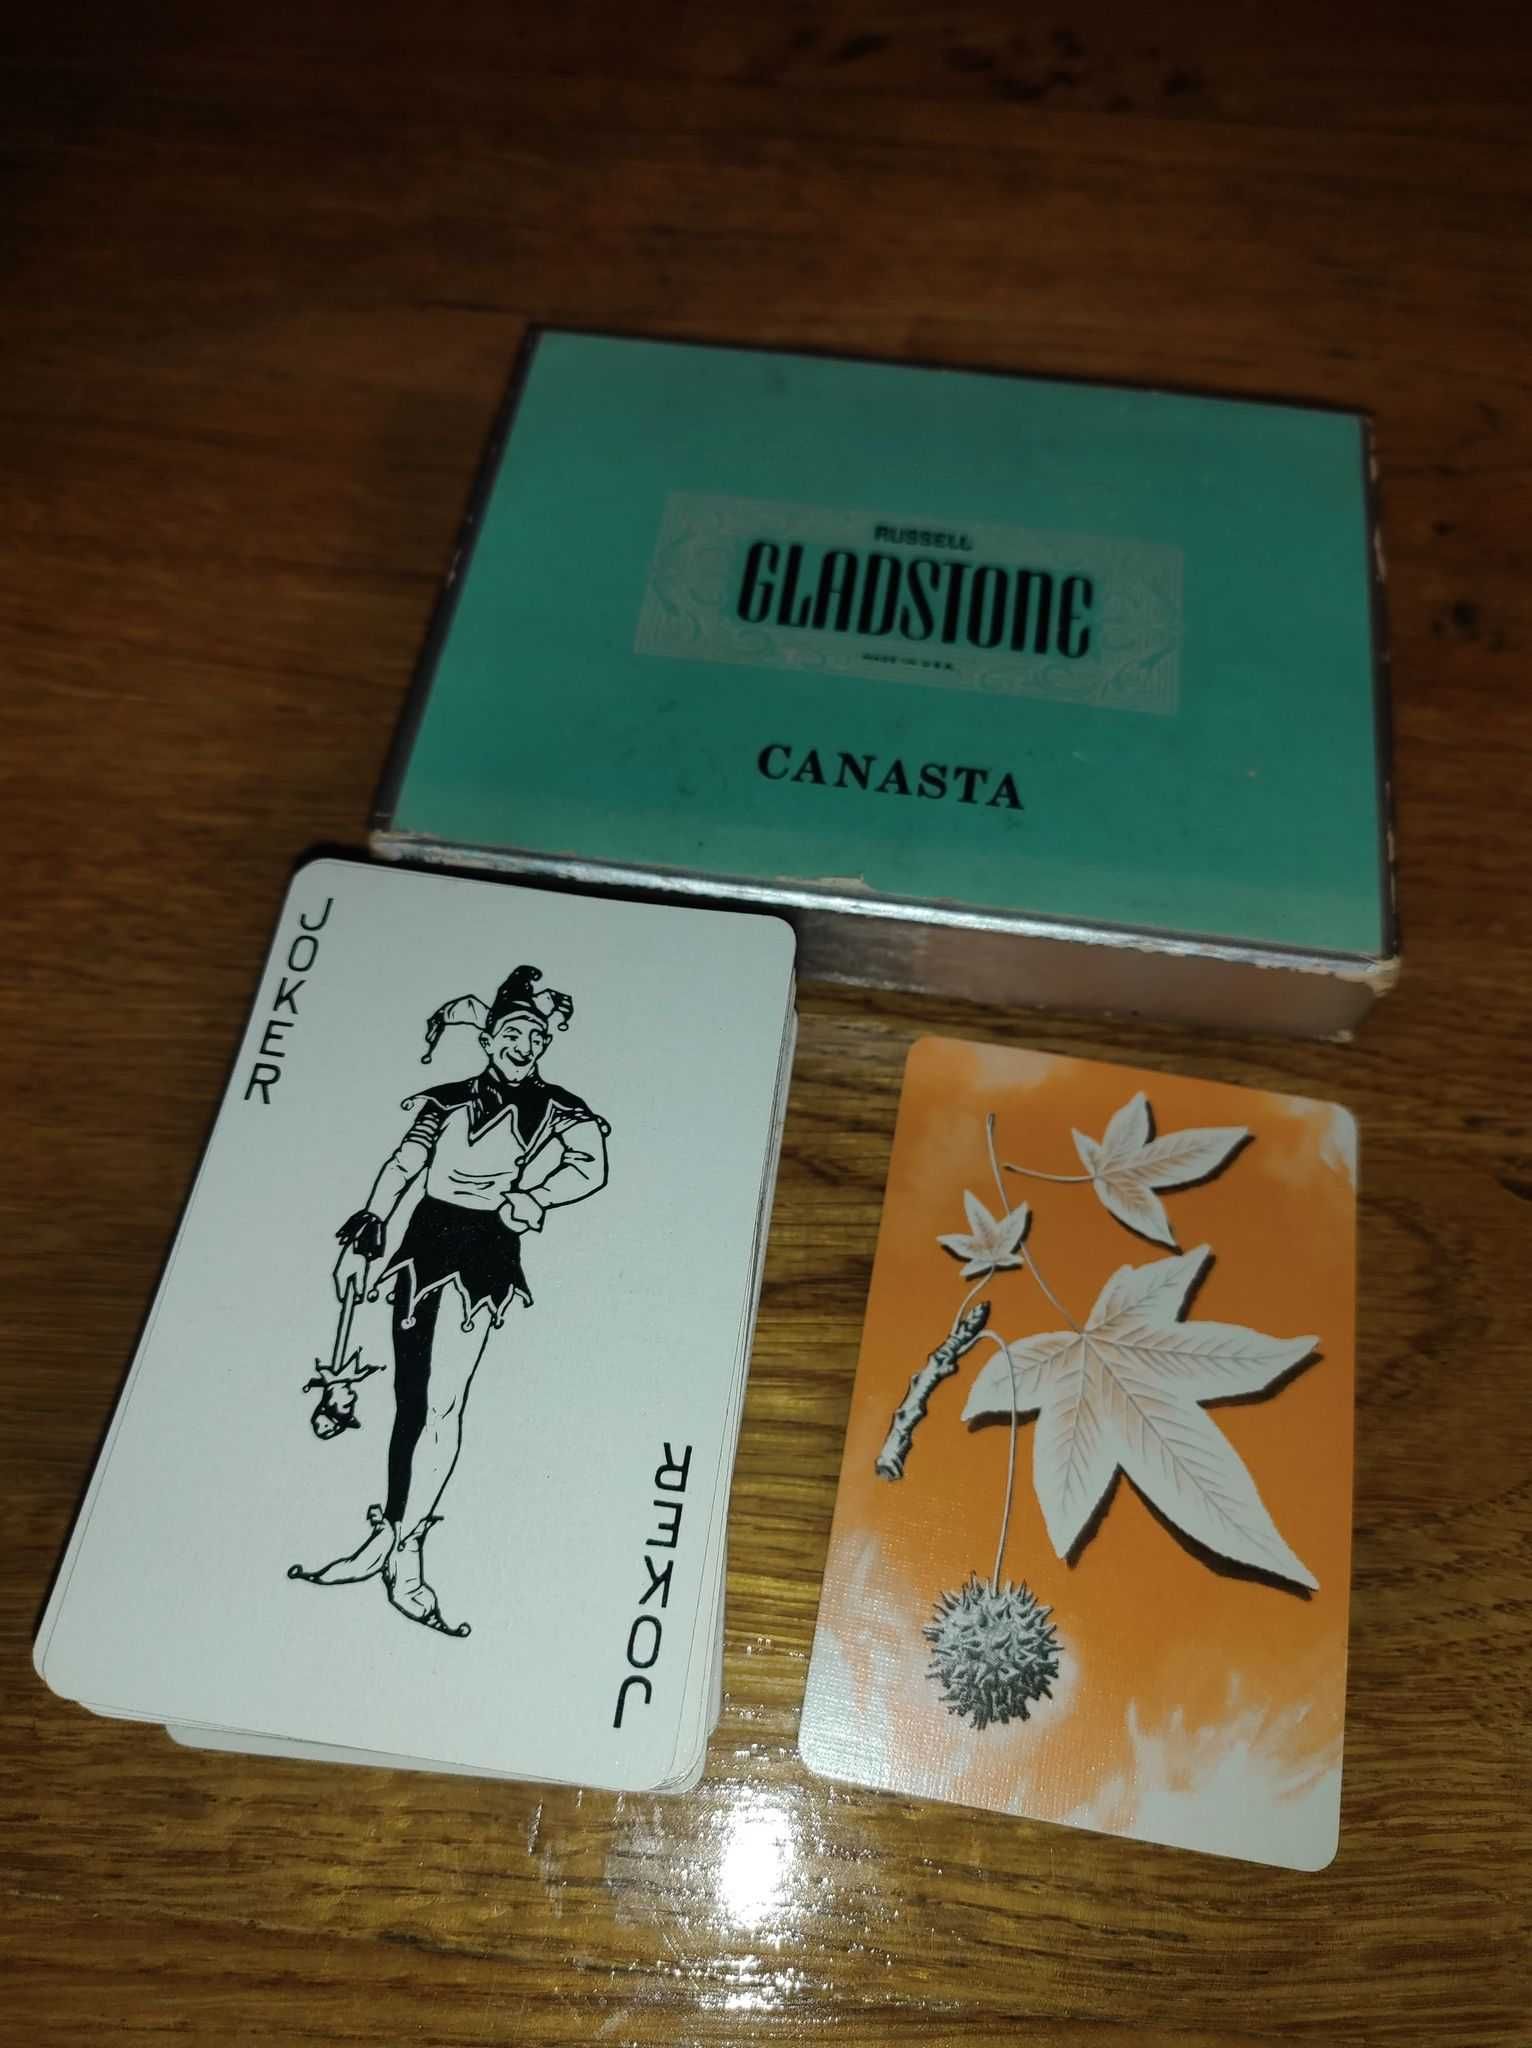 Vintage karty do gry Russell Gladstone Canasta